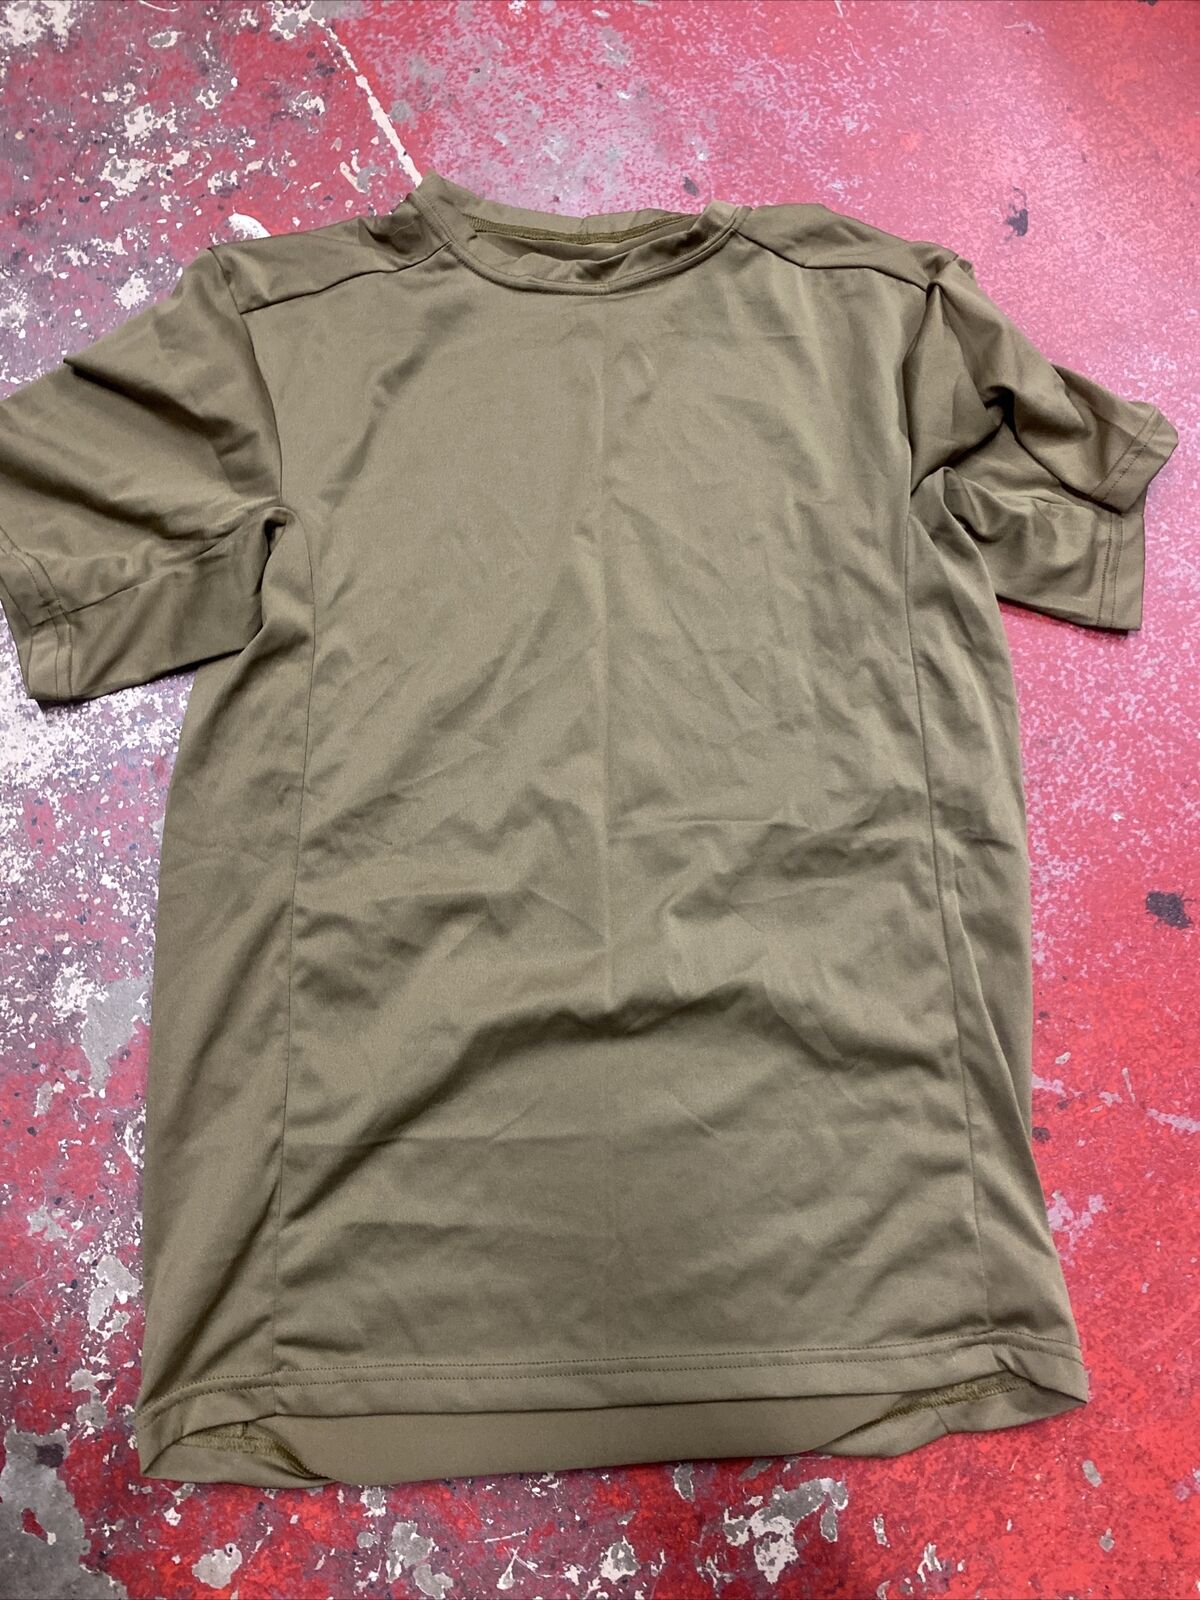 Halys PCU Level 1 T-Shirt Coyote Brown Large